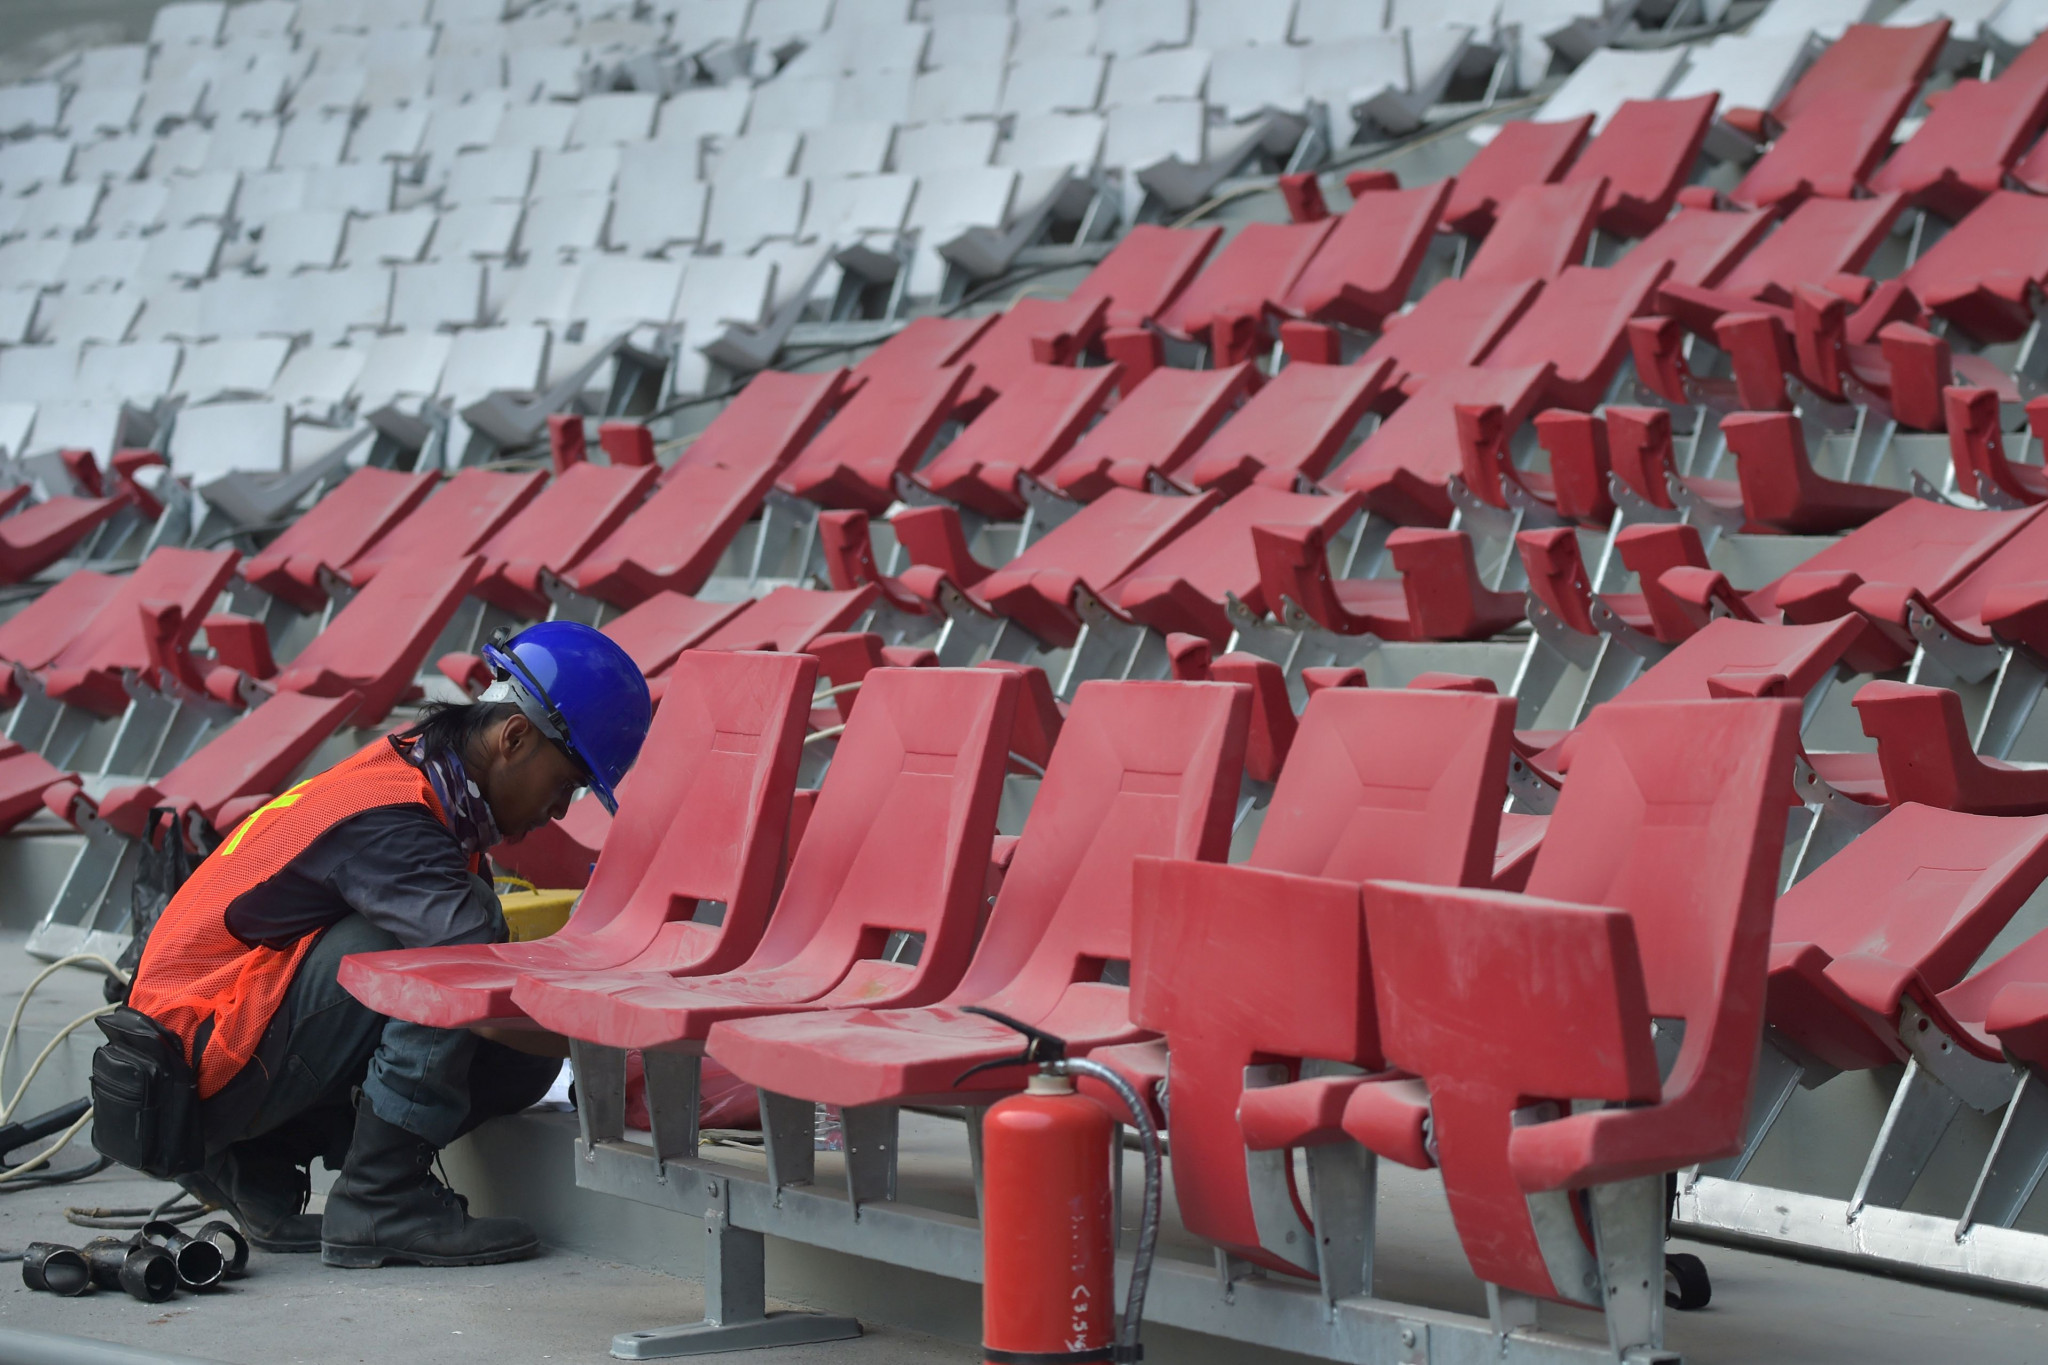 Renovation work included installing seats to replace benches ©Getty Images